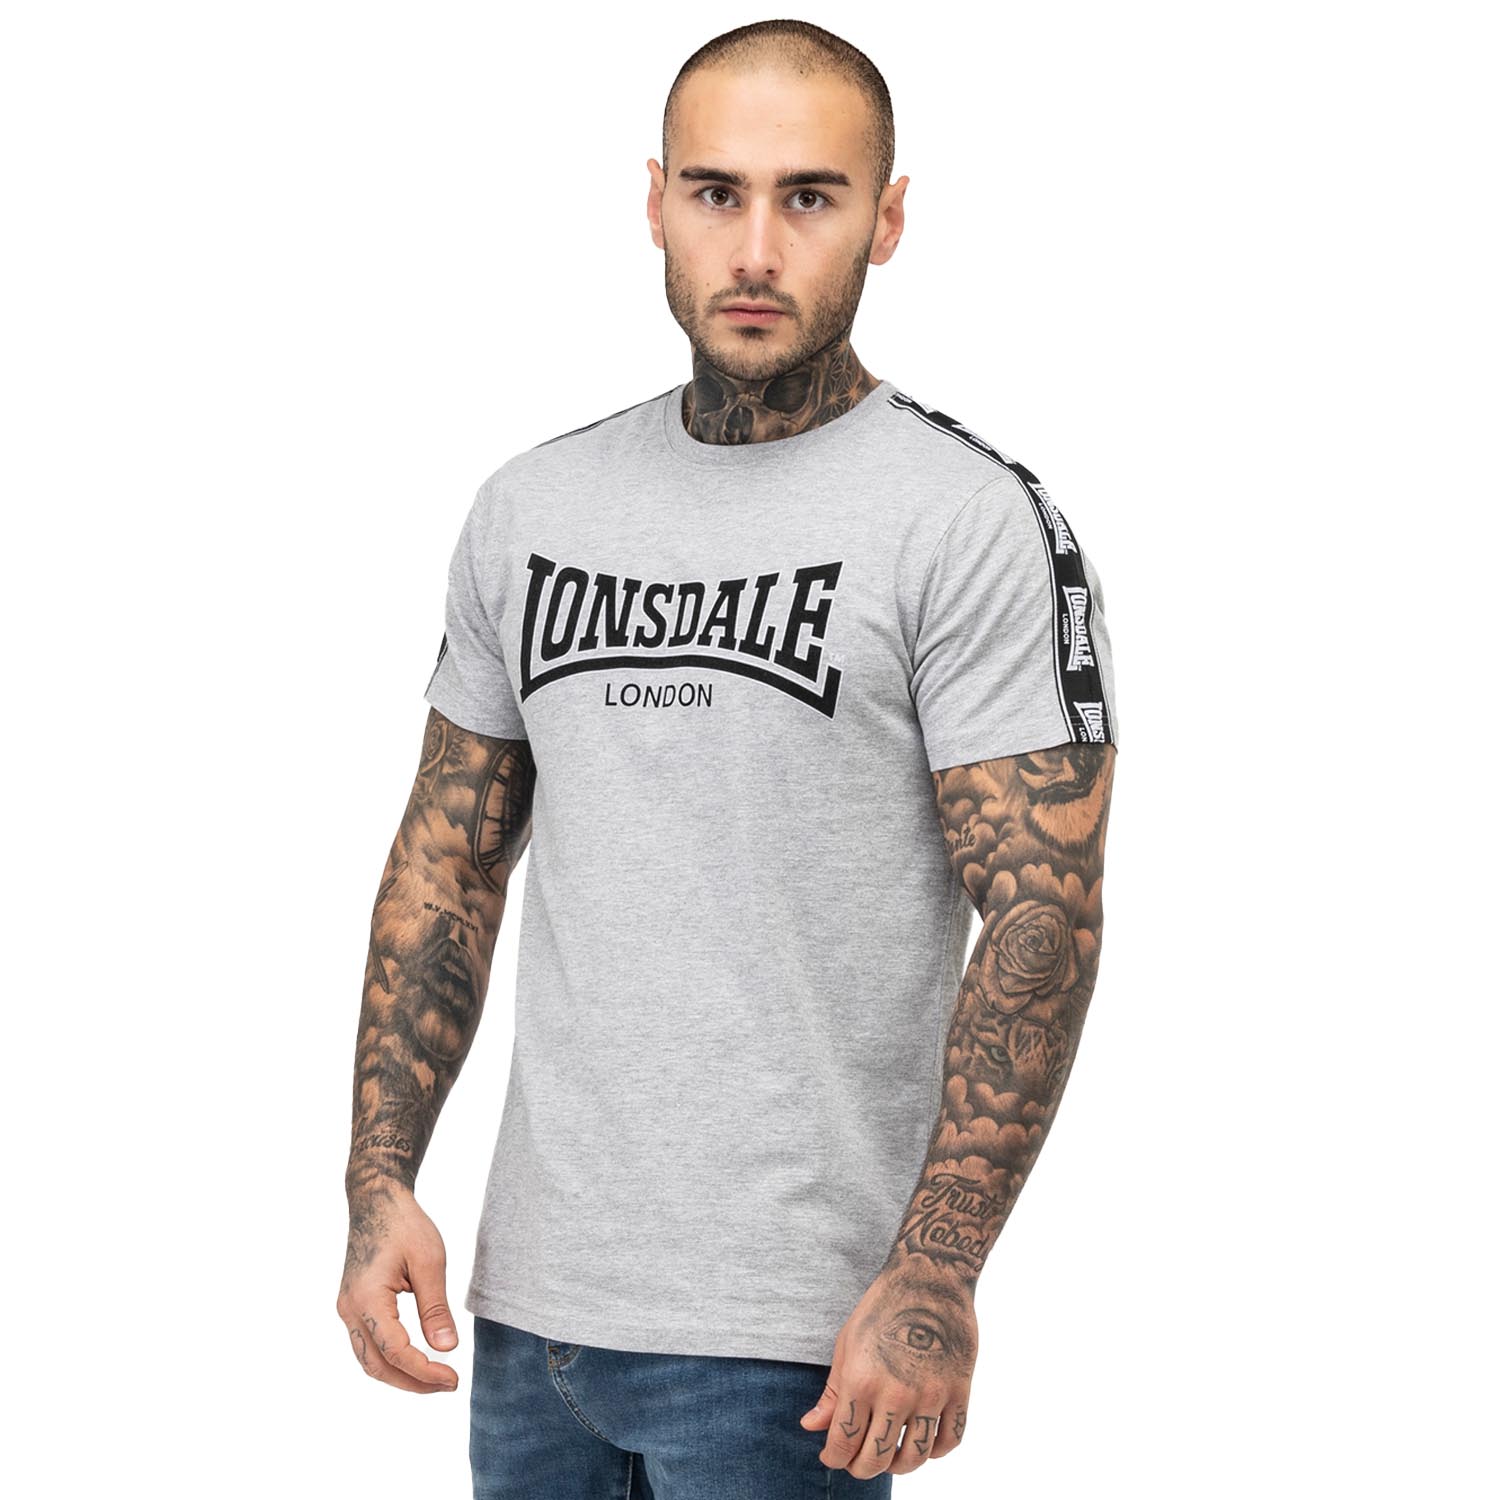 Lonsdale T-Shirt, Vementry, grey